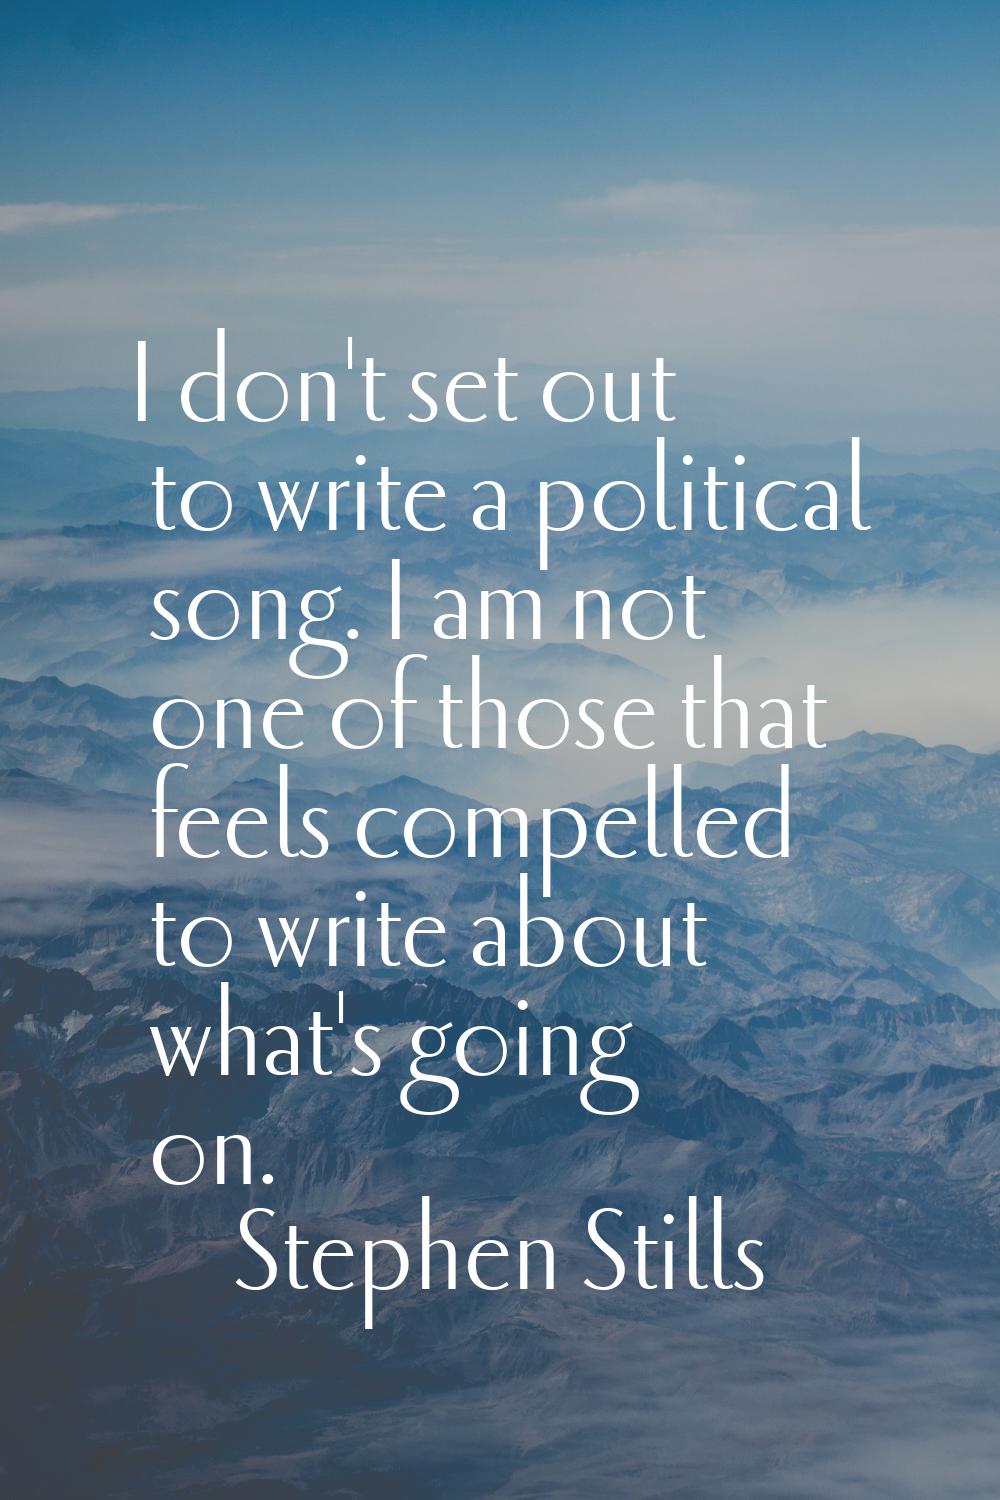 I don't set out to write a political song. I am not one of those that feels compelled to write abou